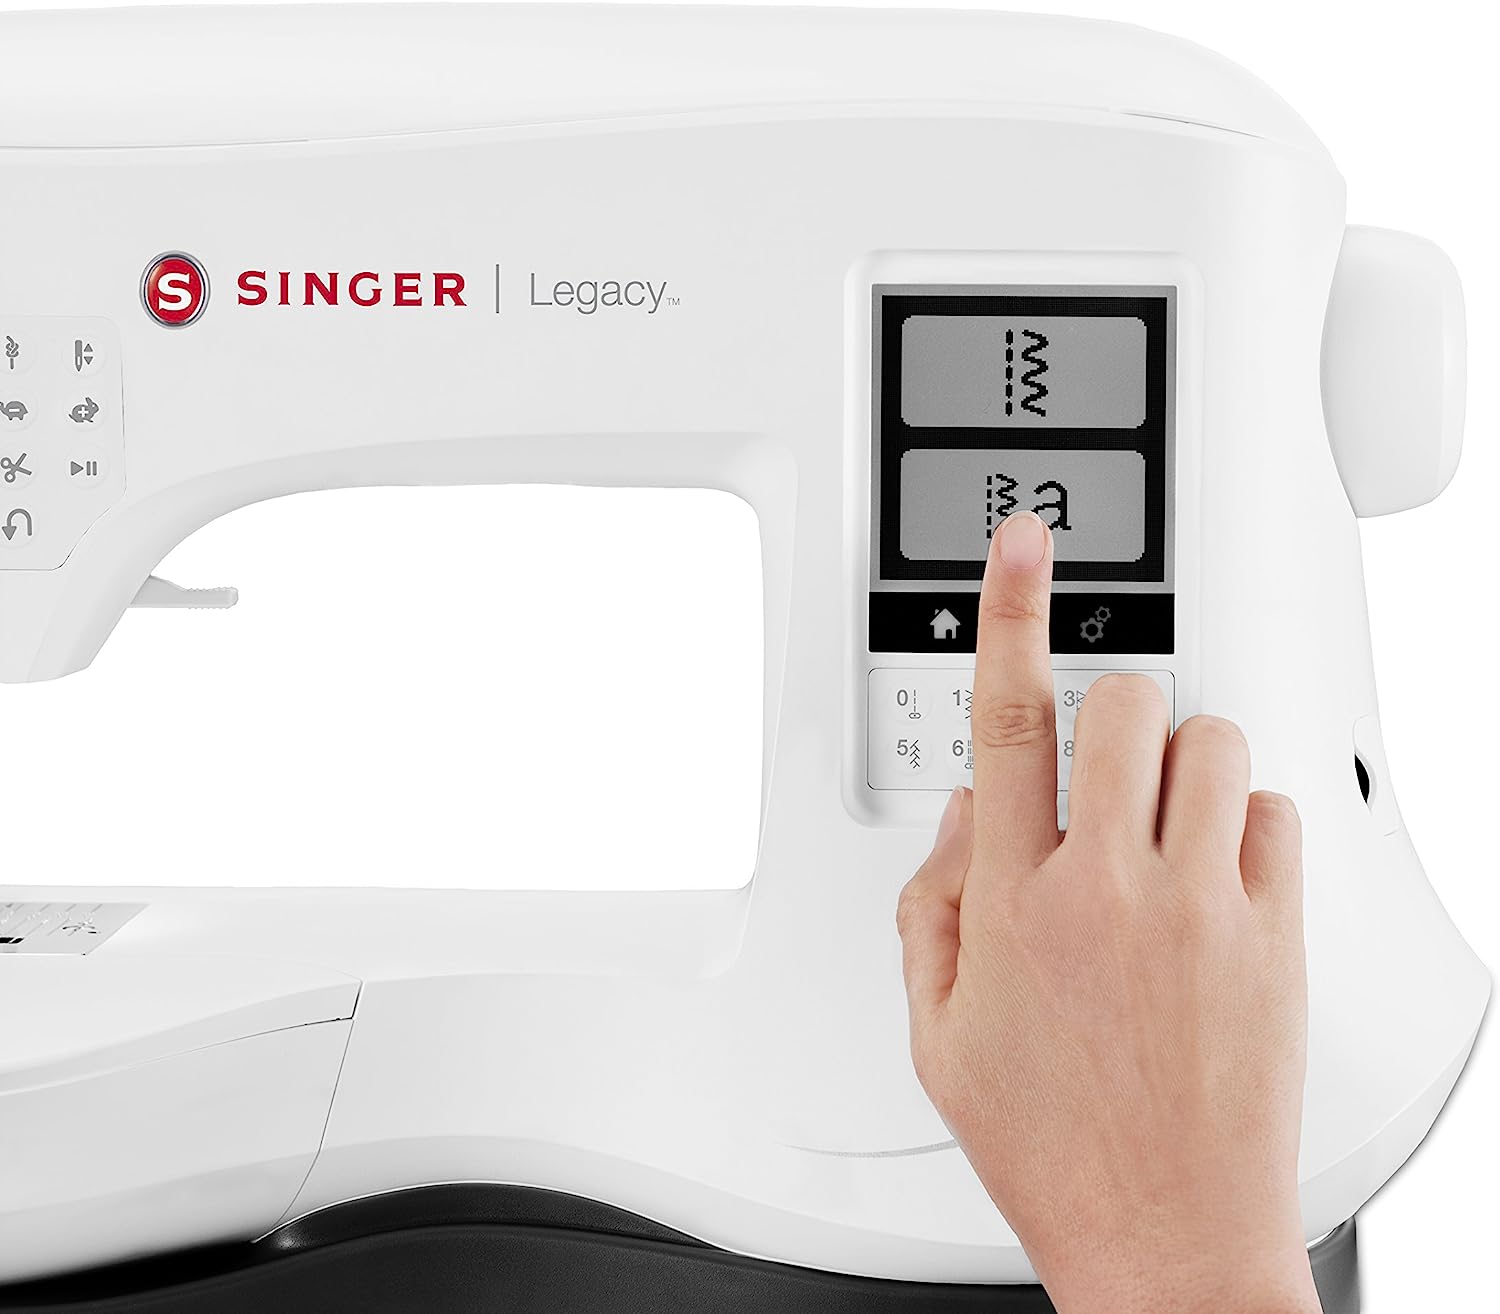 63523d5793567d5be55a3fdb-singer-legacy-se300-embroidery-machine